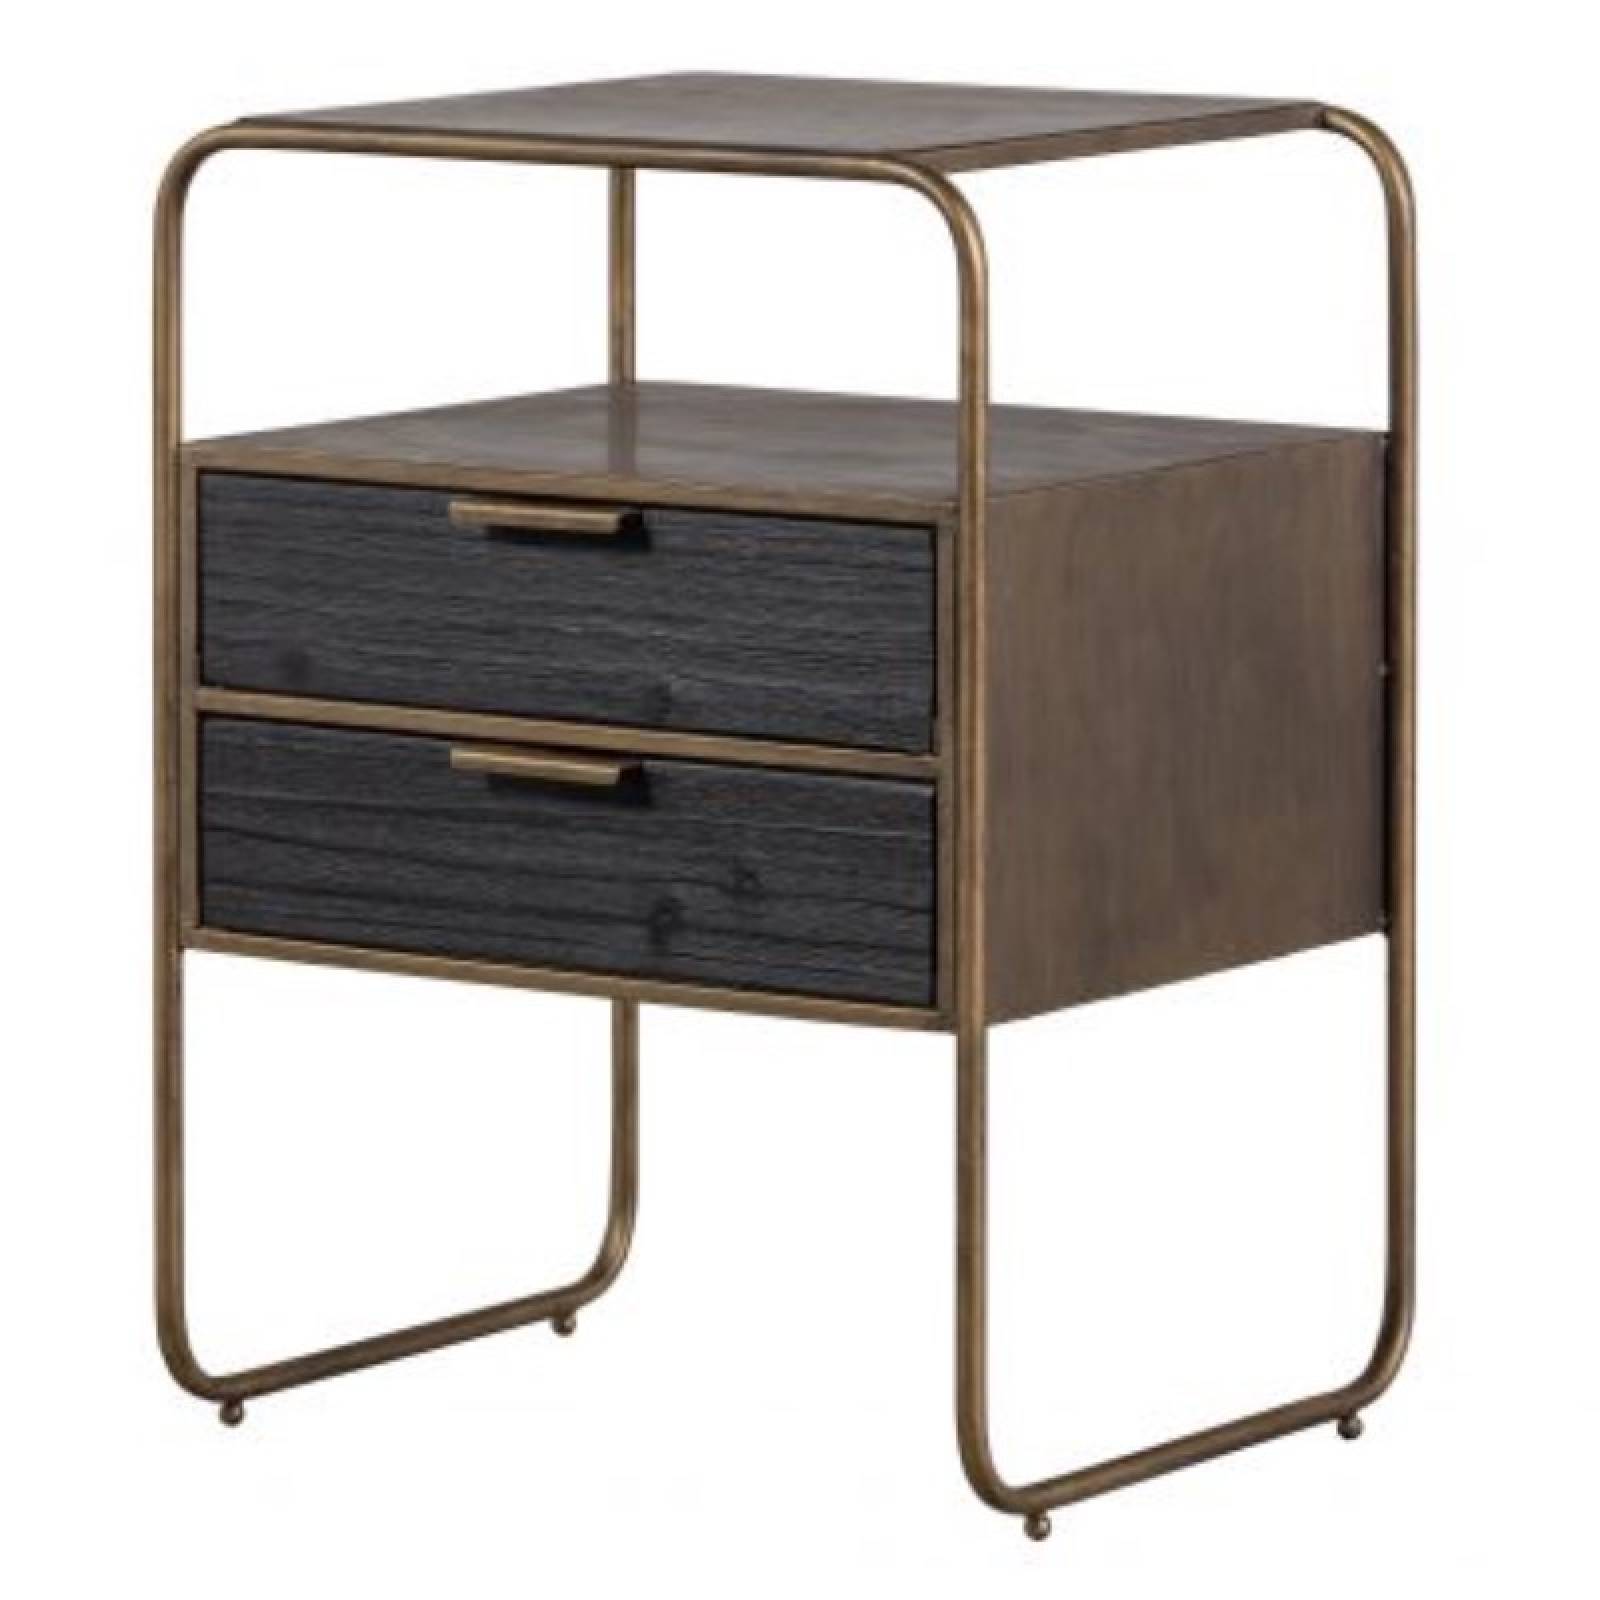 Wooden & Metal Bedside Table With 2 Drawers